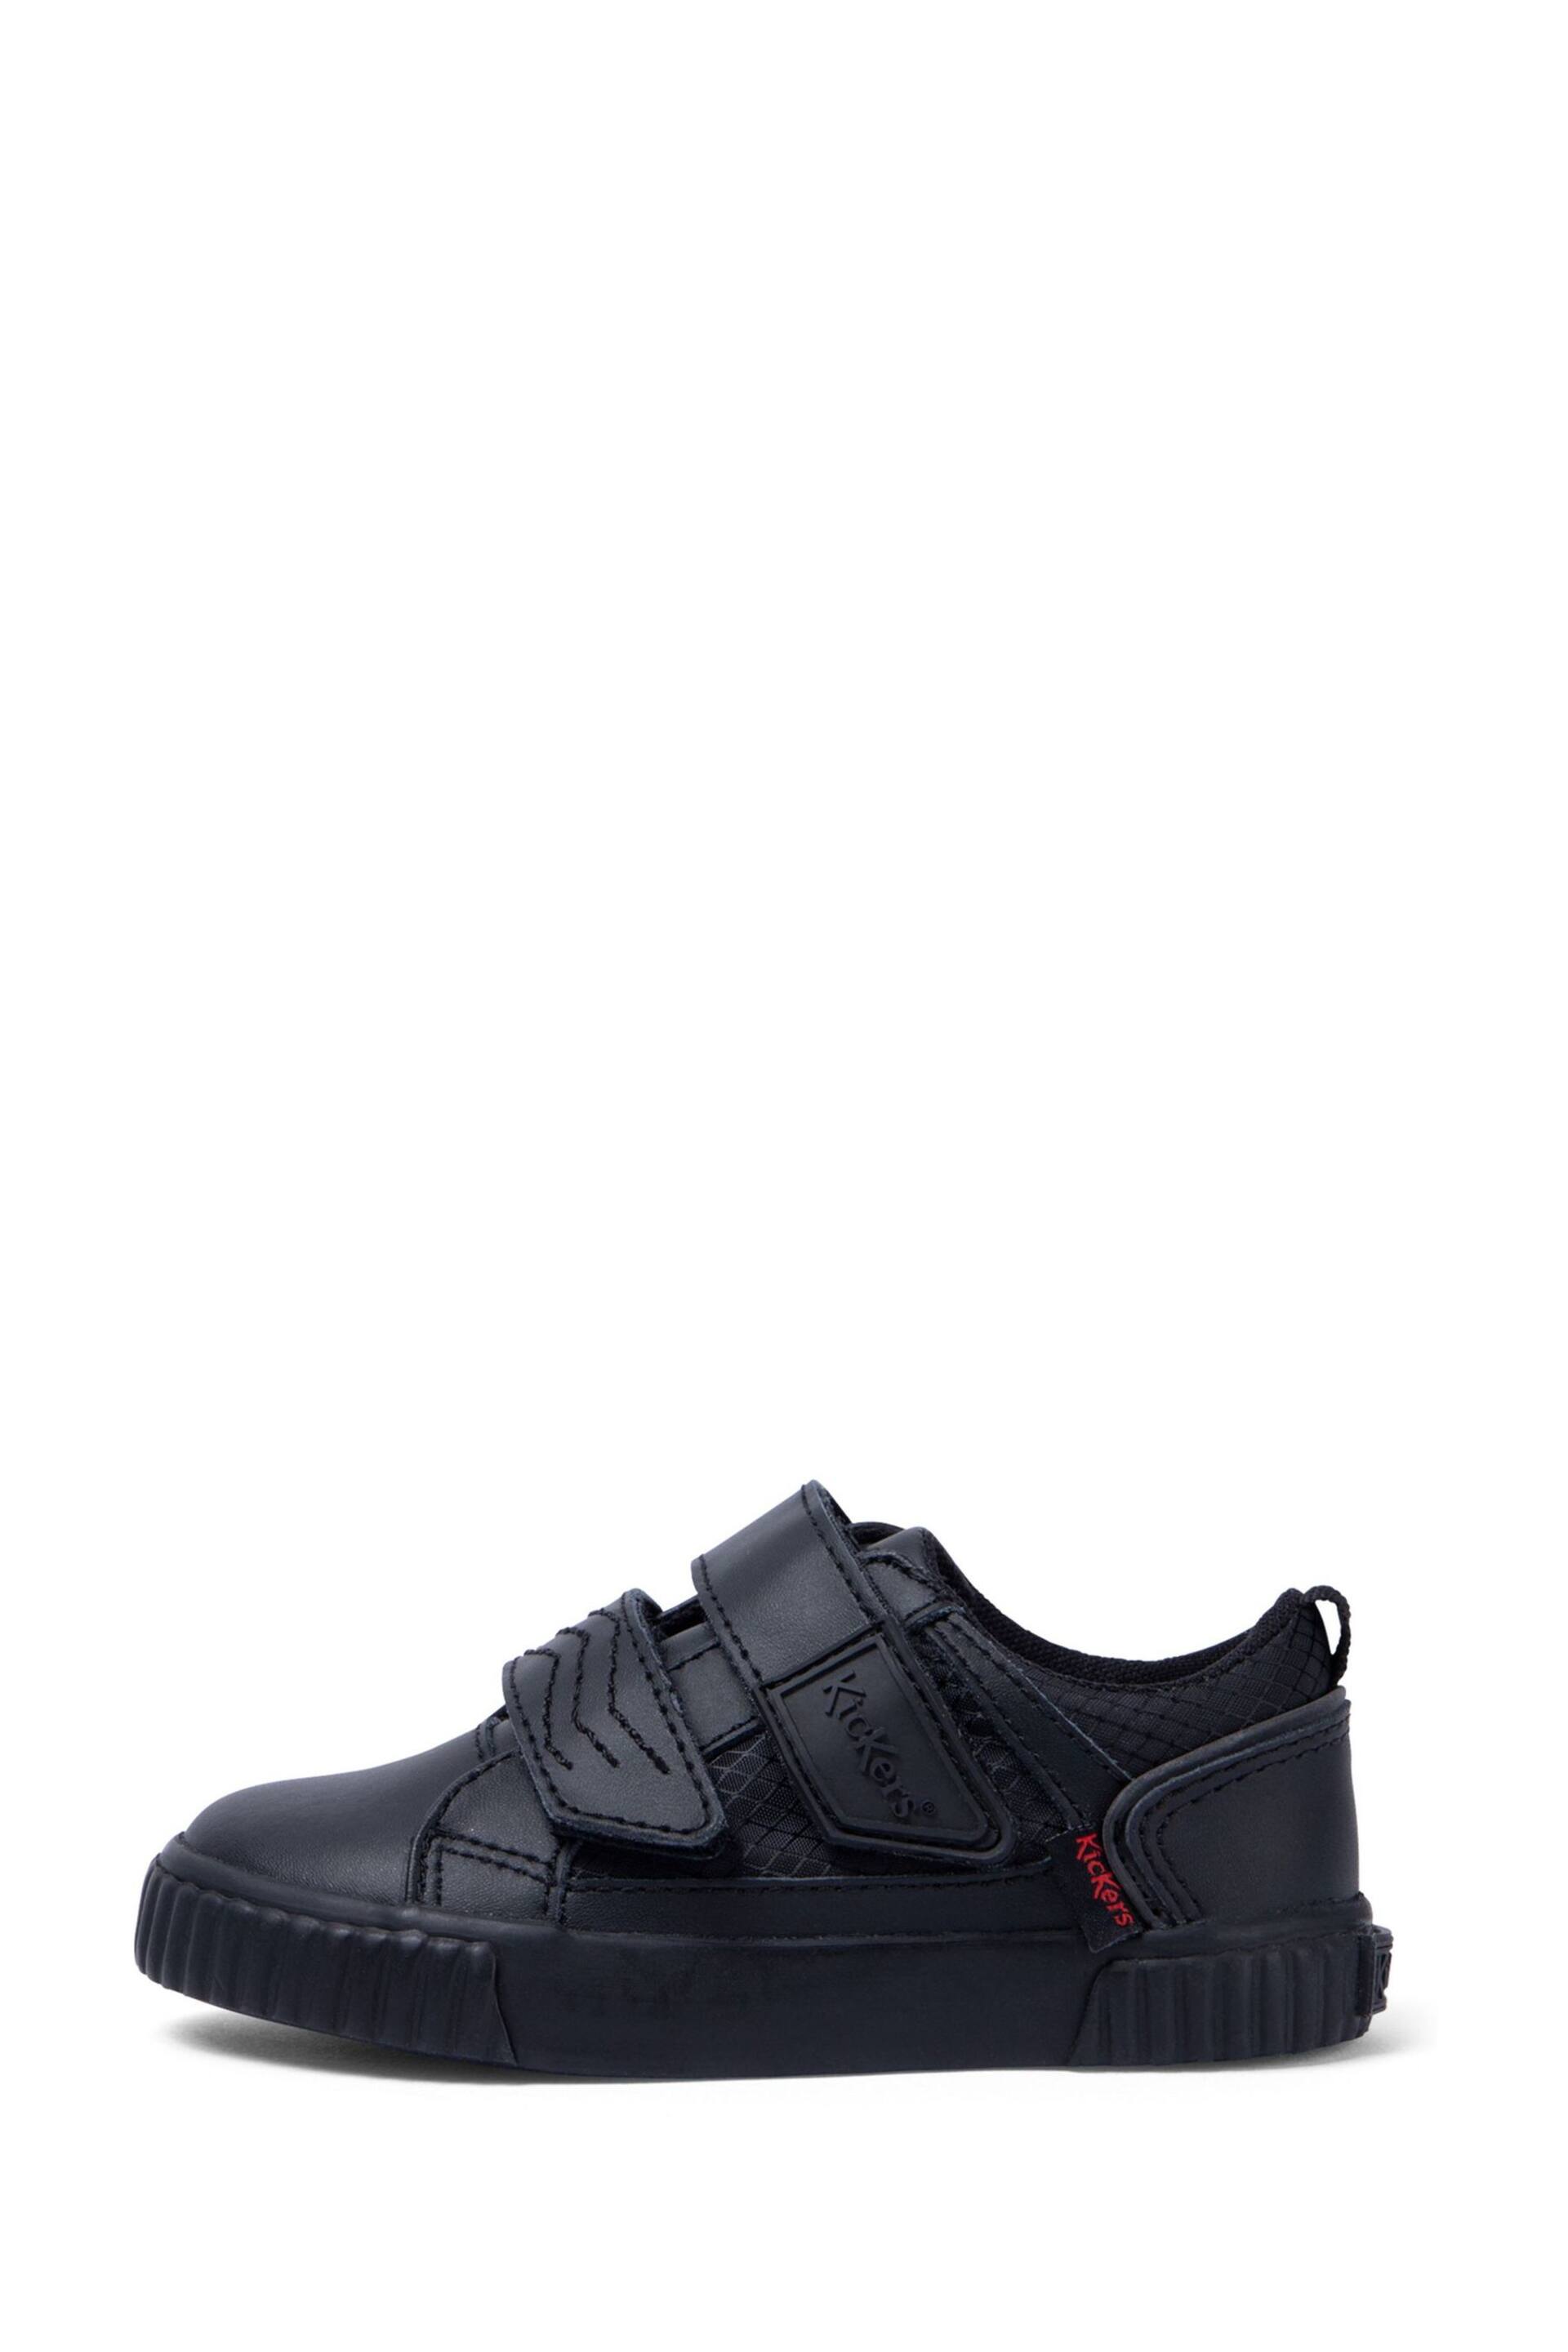 Kickers Infant Tovni Twin Flex Leather Black Trainers - Image 2 of 10